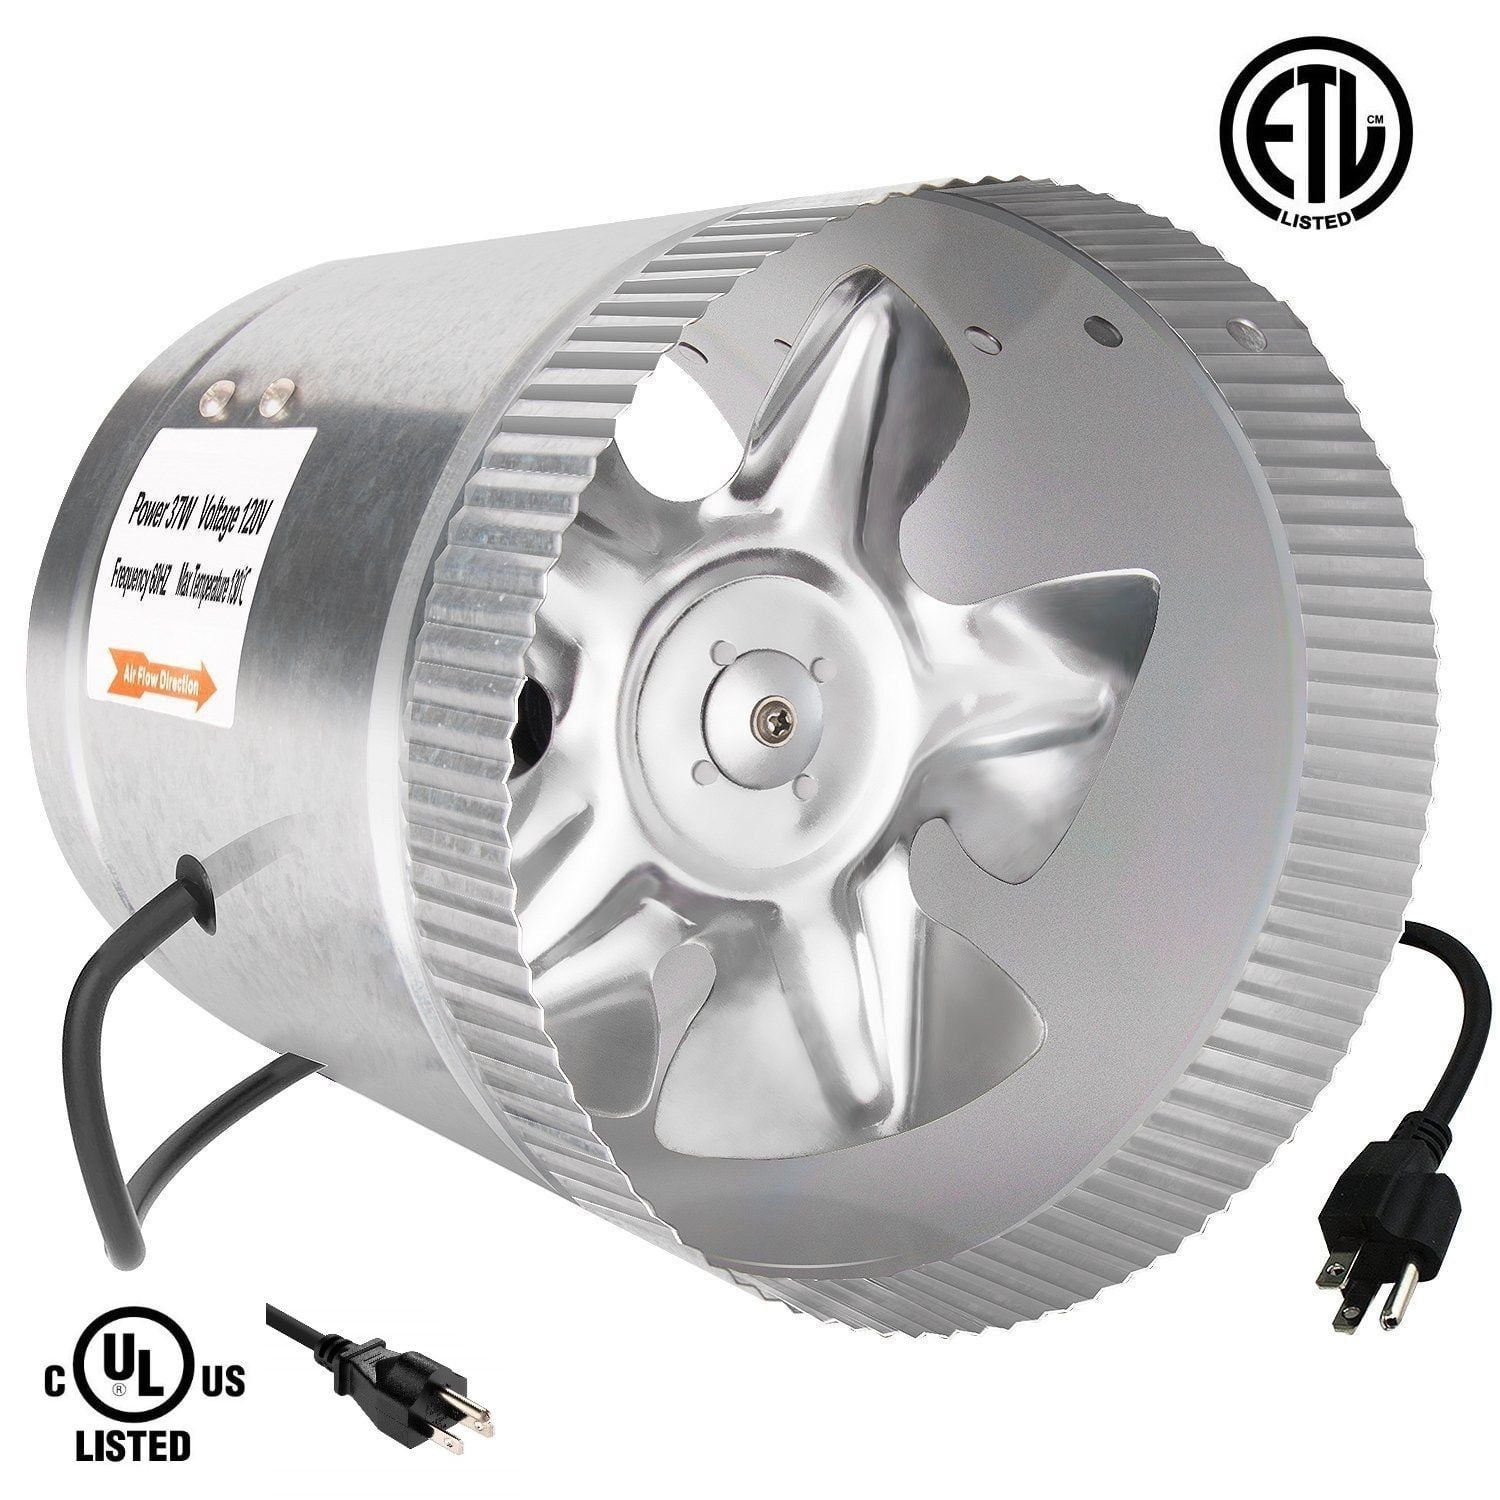 Details about    4" 6" 8"  Booster Fan Inline Duct Vent Exhaust Intake Blower 110/120V